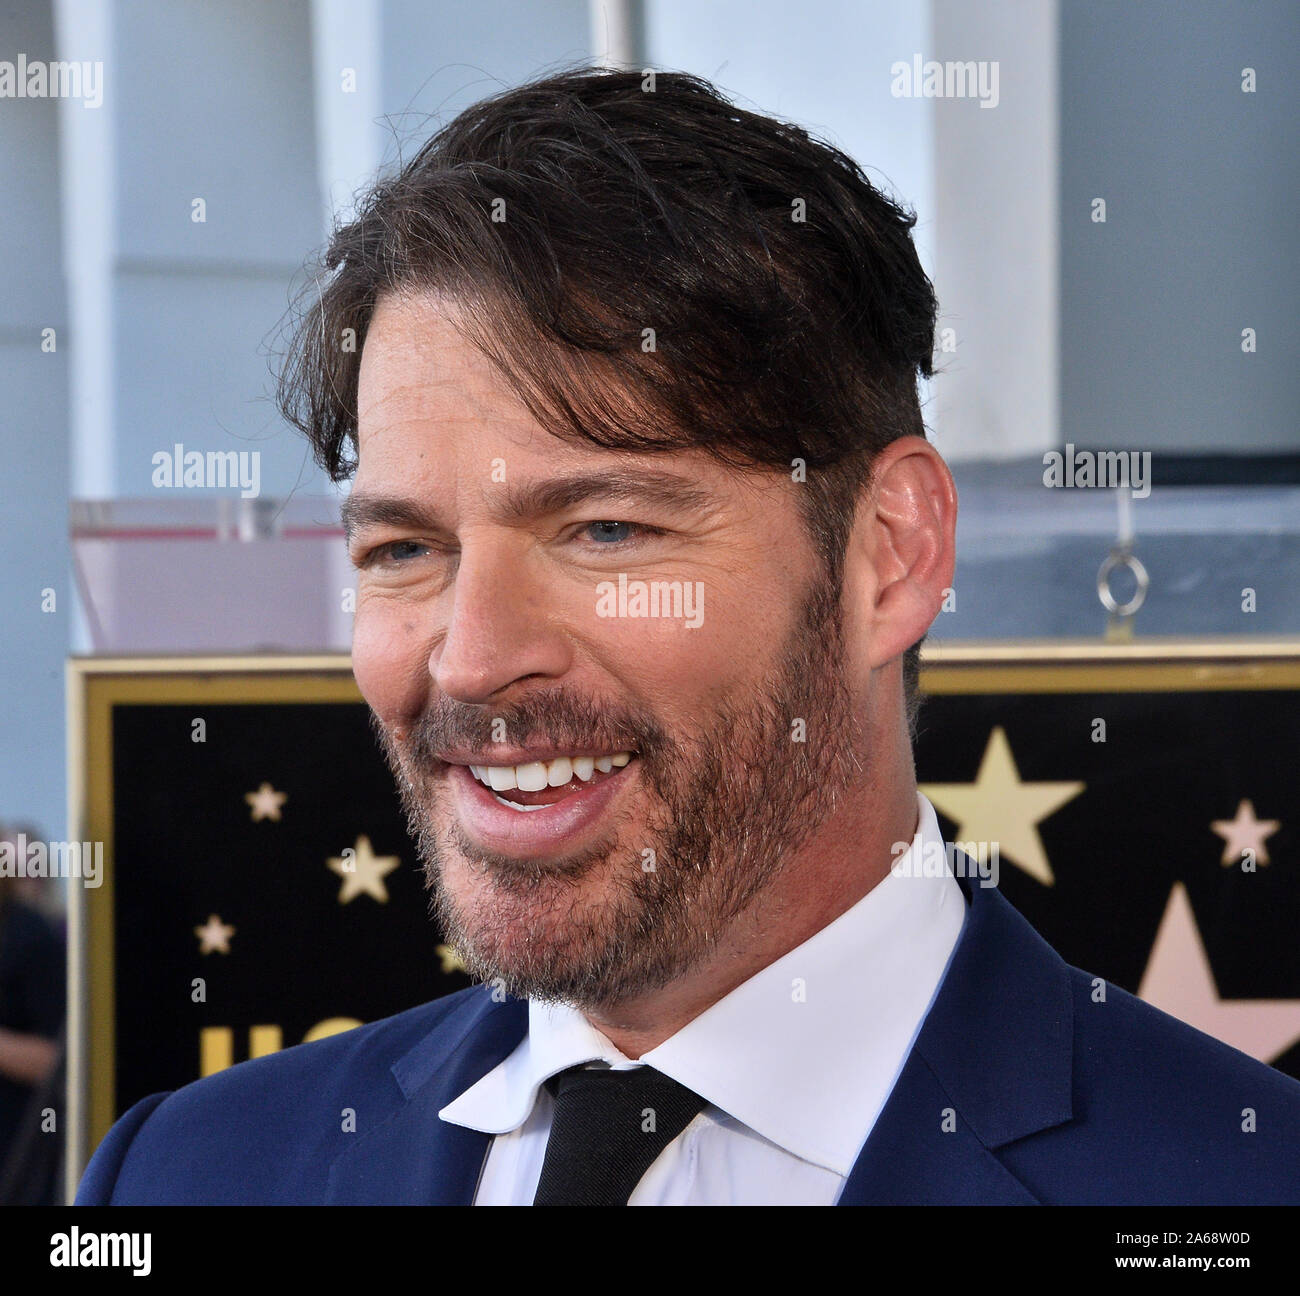 Los Angeles, United States. 24th Oct, 2019. Grammy and Emmy-award winning American singer, composer, actor, and television host Harry Connick Jr. speaks with reporters following an unveiling ceremony honoring him with the 2,678th star on the Hollywood Walk of Fame in Los Angeles on Thursday, October 24th, 2019. Connick's star is next to Cole Porter, one of his favorite songwriters. Photo by Jim Ruymen/UPI Credit: UPI/Alamy Live News Stock Photo